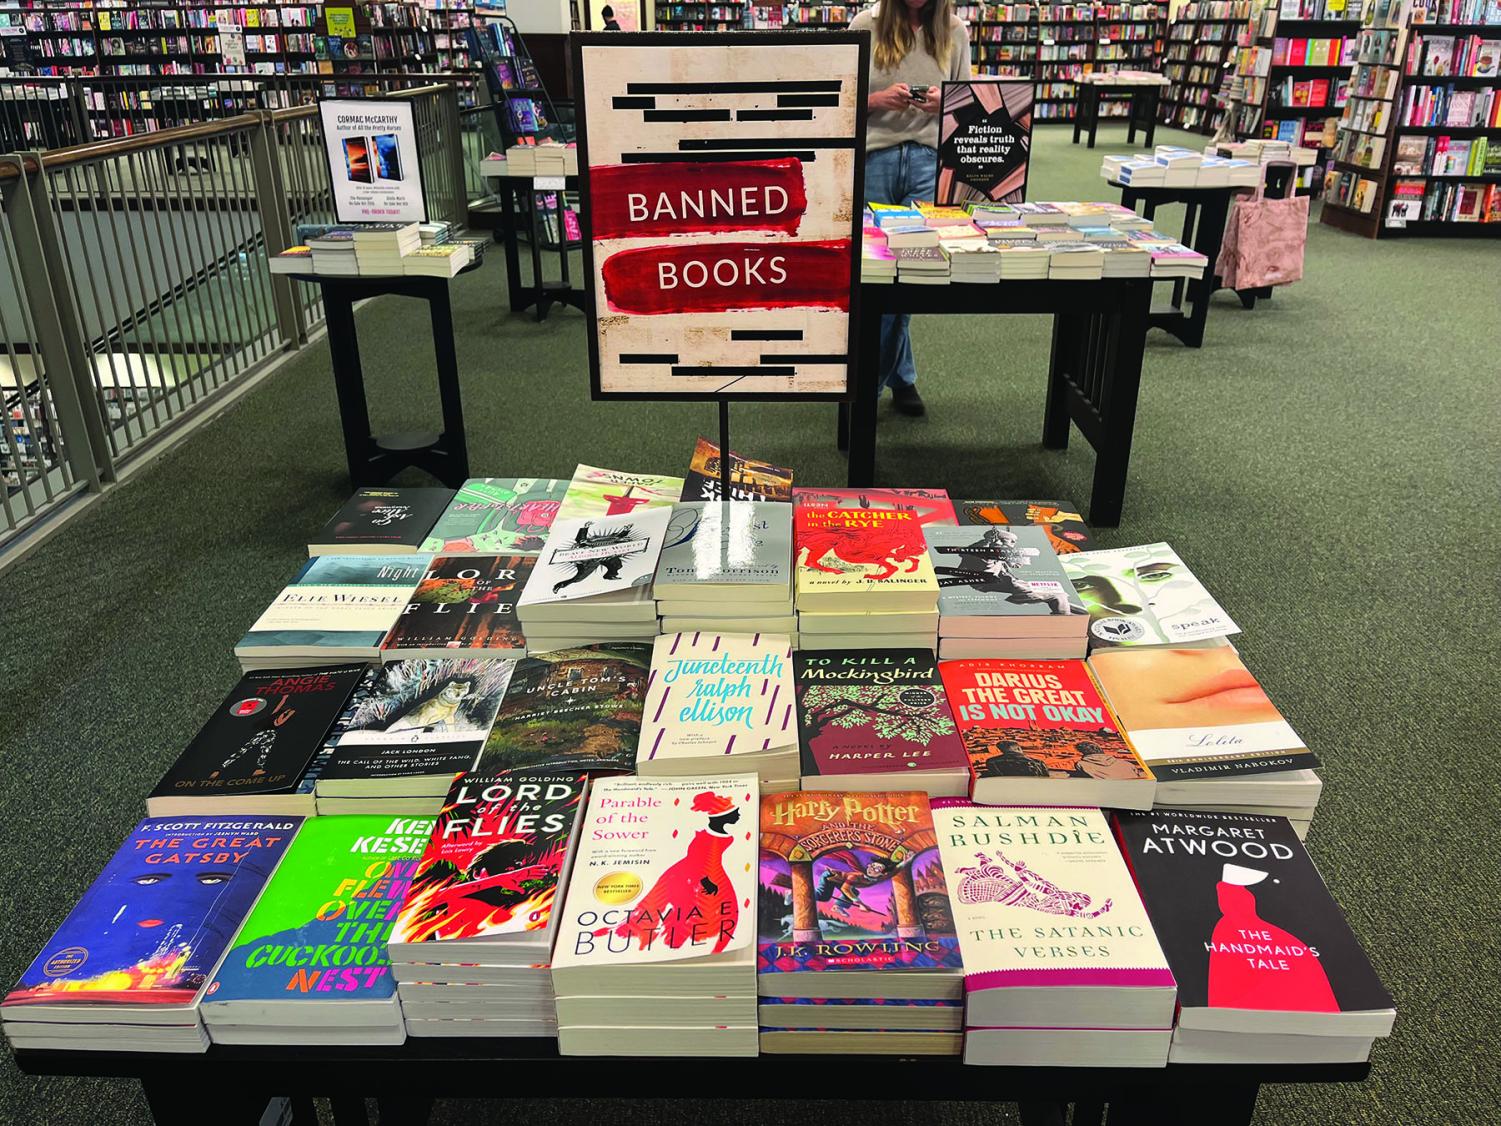 Books that are banned in certain parts of the country are displayed for purchase at Barnes & Noble in Deerfield. At the Glenbrook North Library and the Northbrook Public Library, readers have access to books that are banned in other communities. Photo by Chase Goldstein